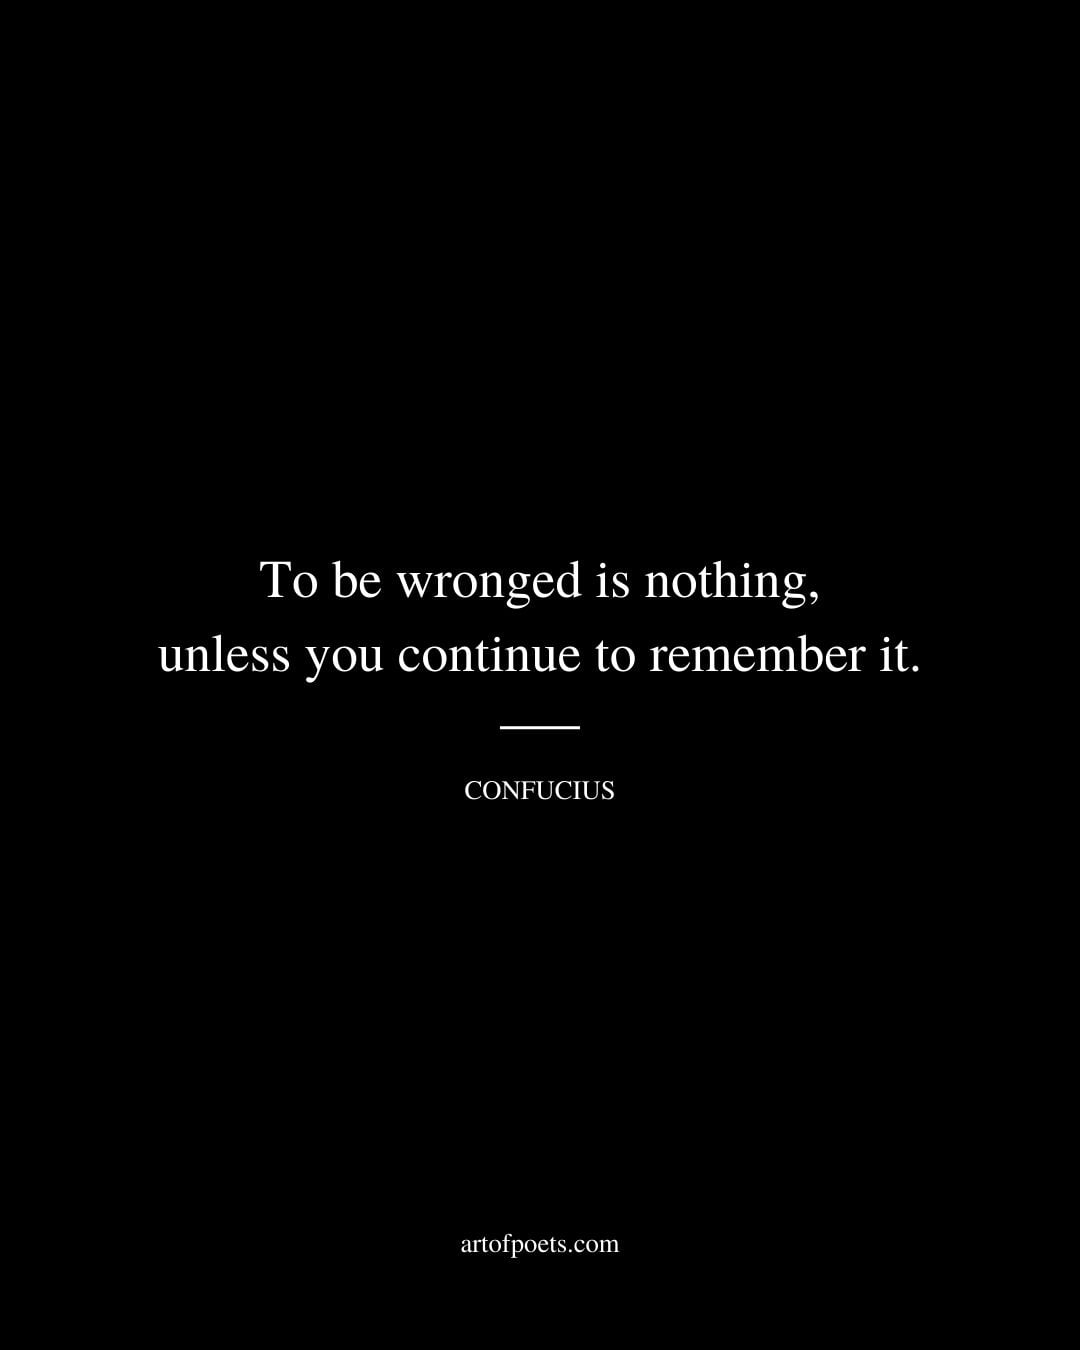 To be wronged is nothing unless you continue to remember it